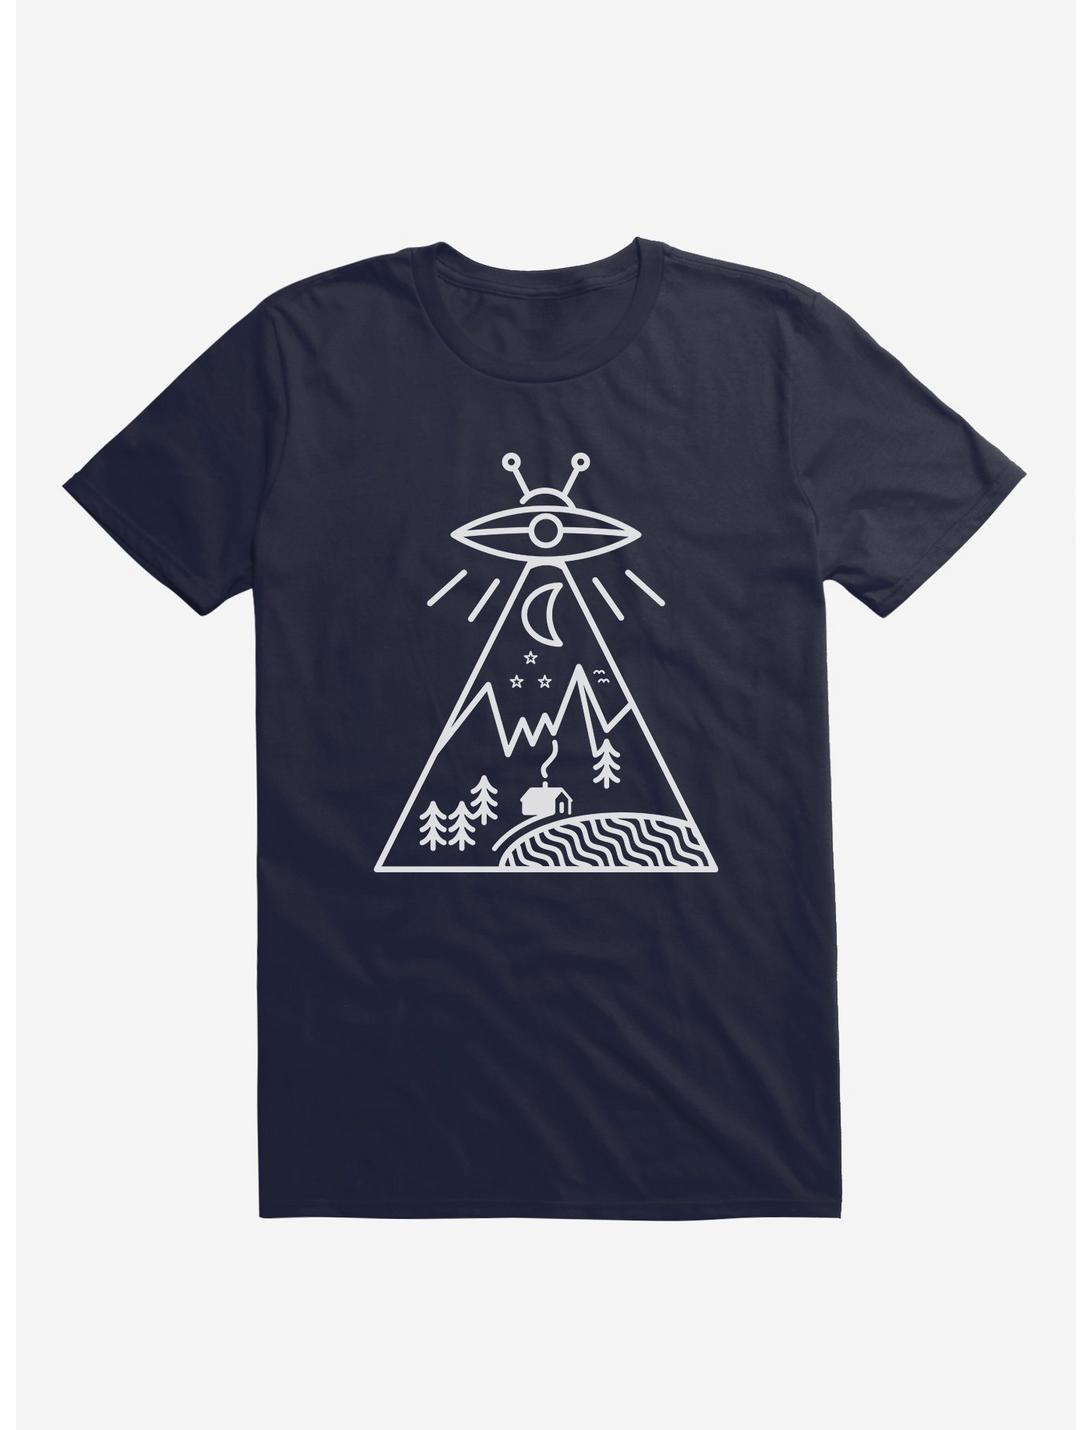 They Made Us Alien Navy Blue T-Shirt, NAVY, hi-res